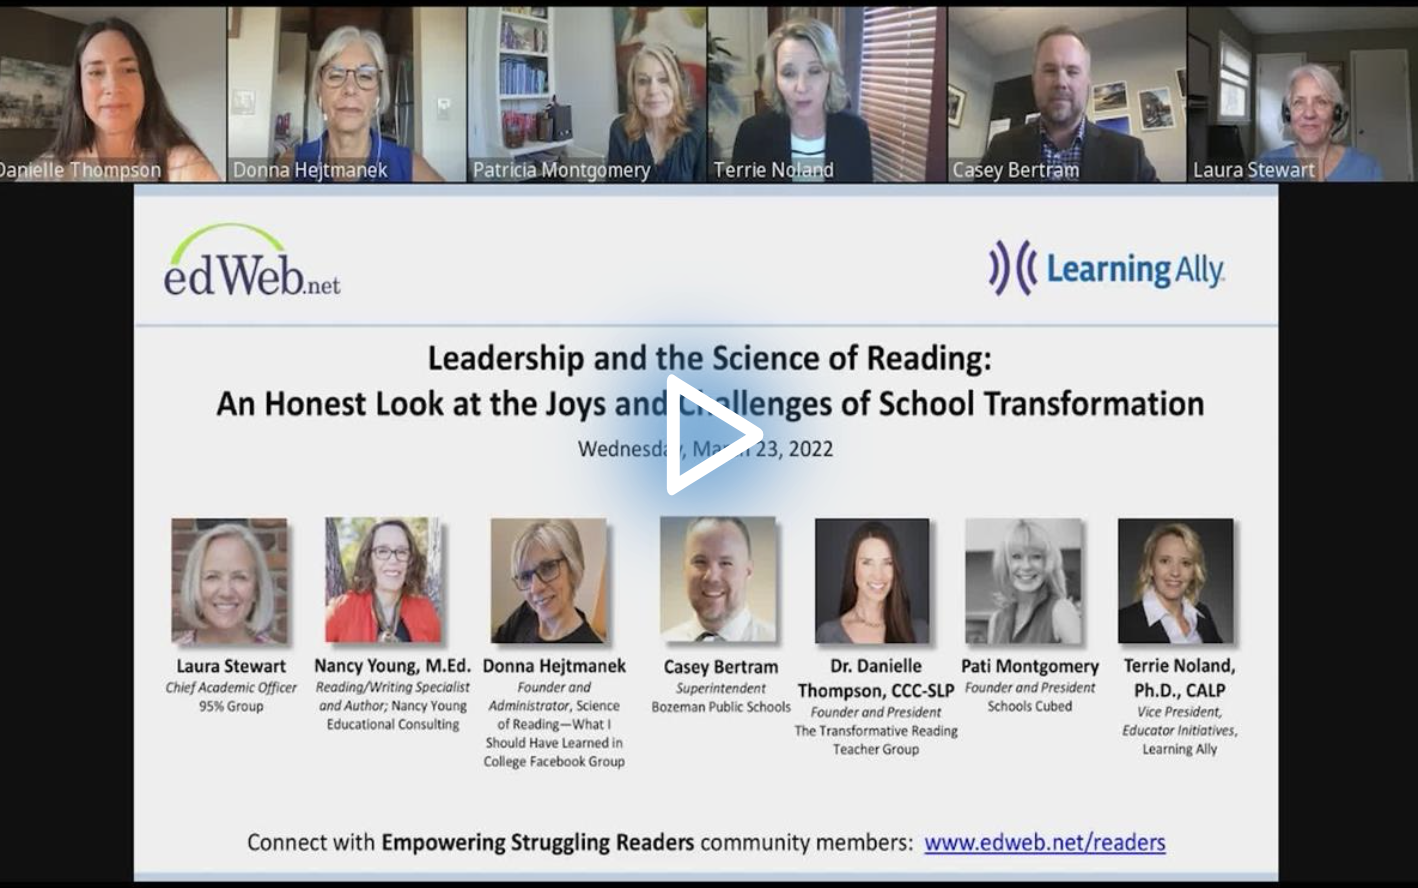 Leadership and the Science of Reading: An Honest Look at the Joys and Challenges of School Transformation edLeader Panel recording link